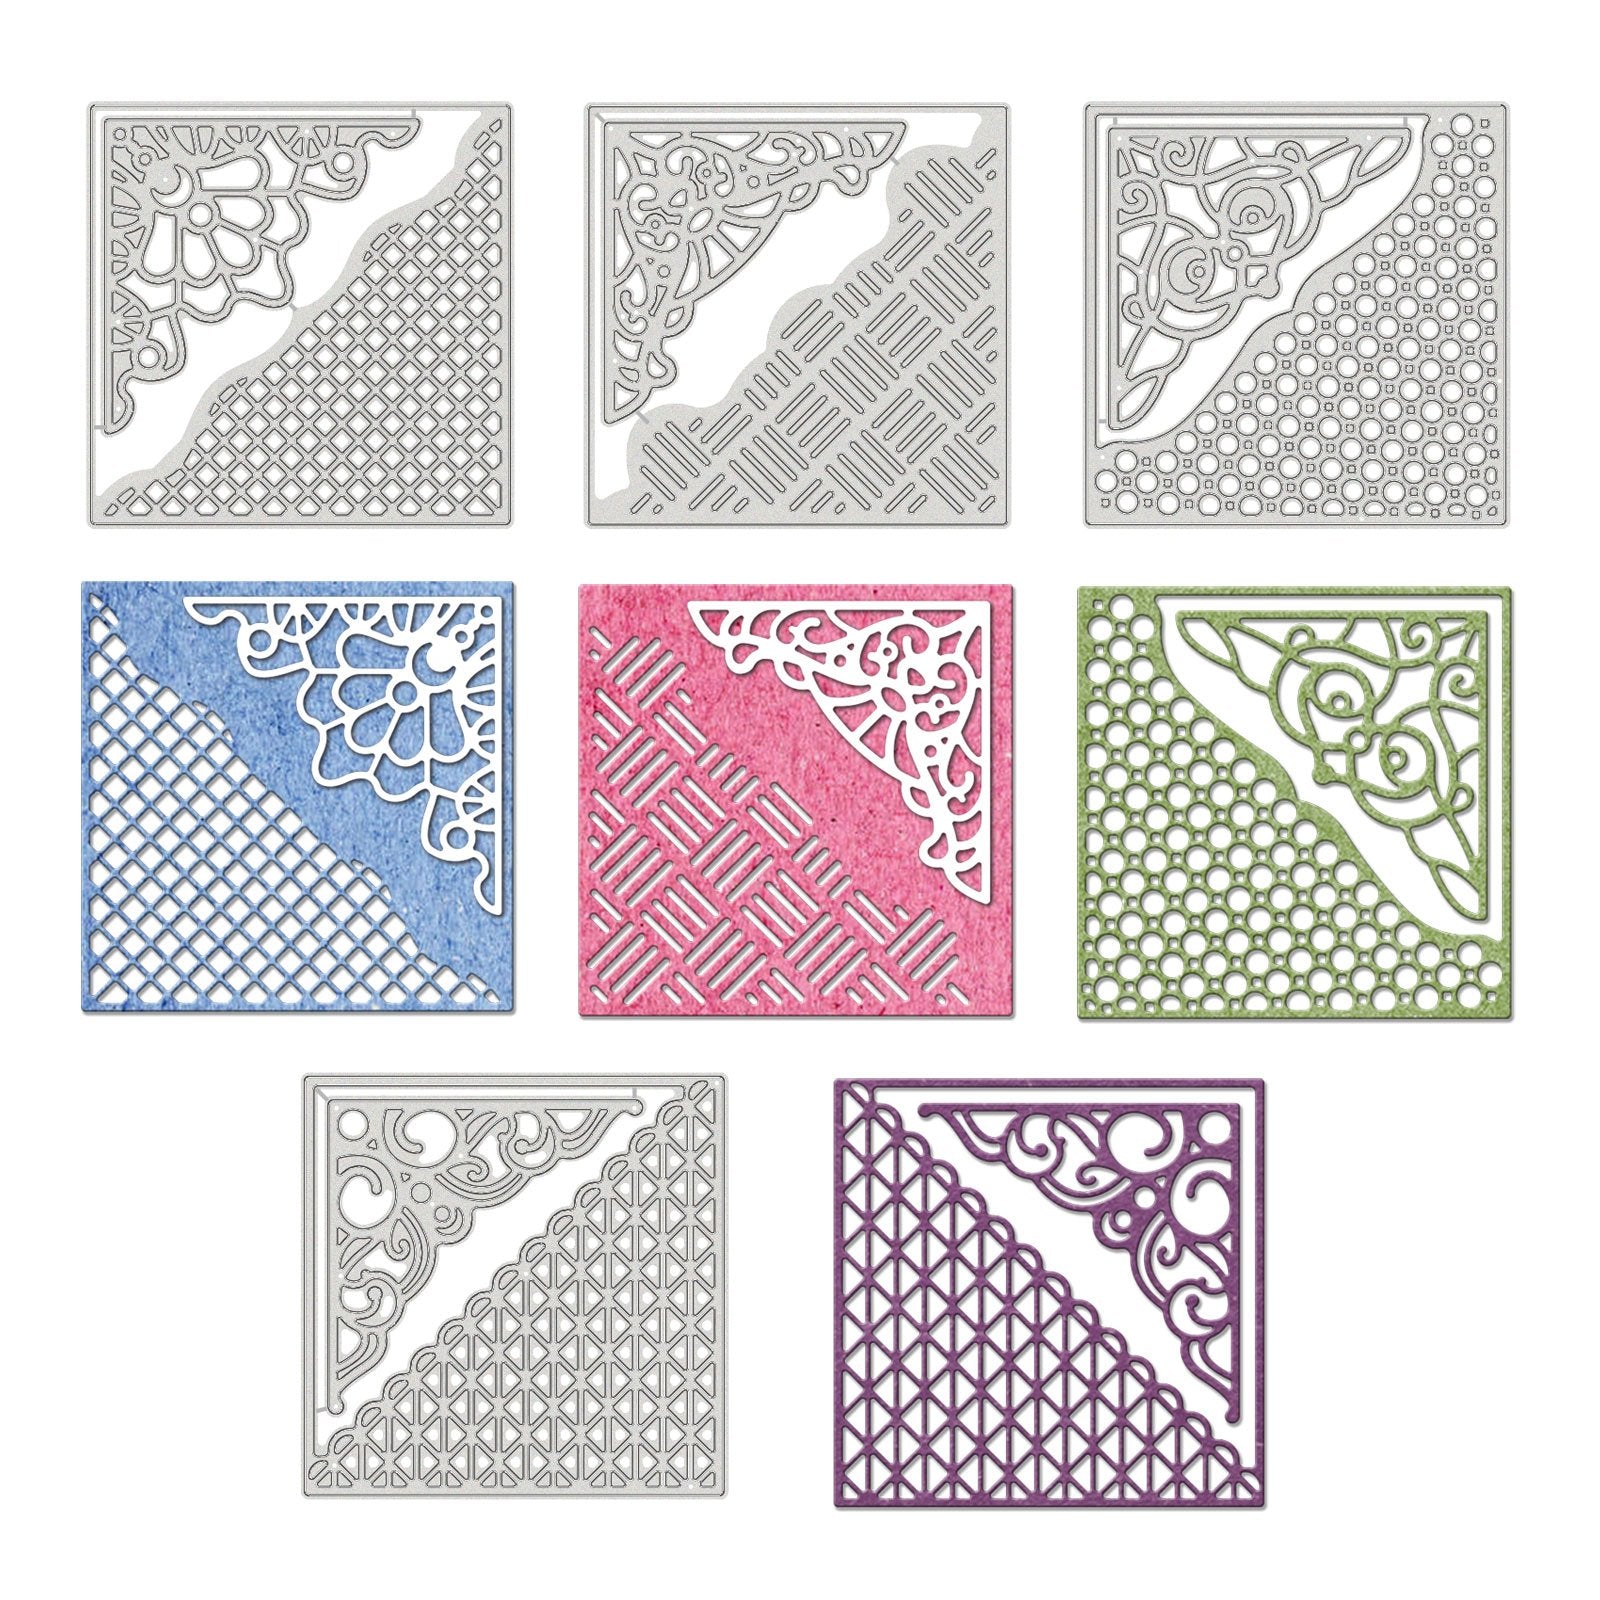 Lace Diary Scrapbooking Album, Lace Tape Scrapbooking